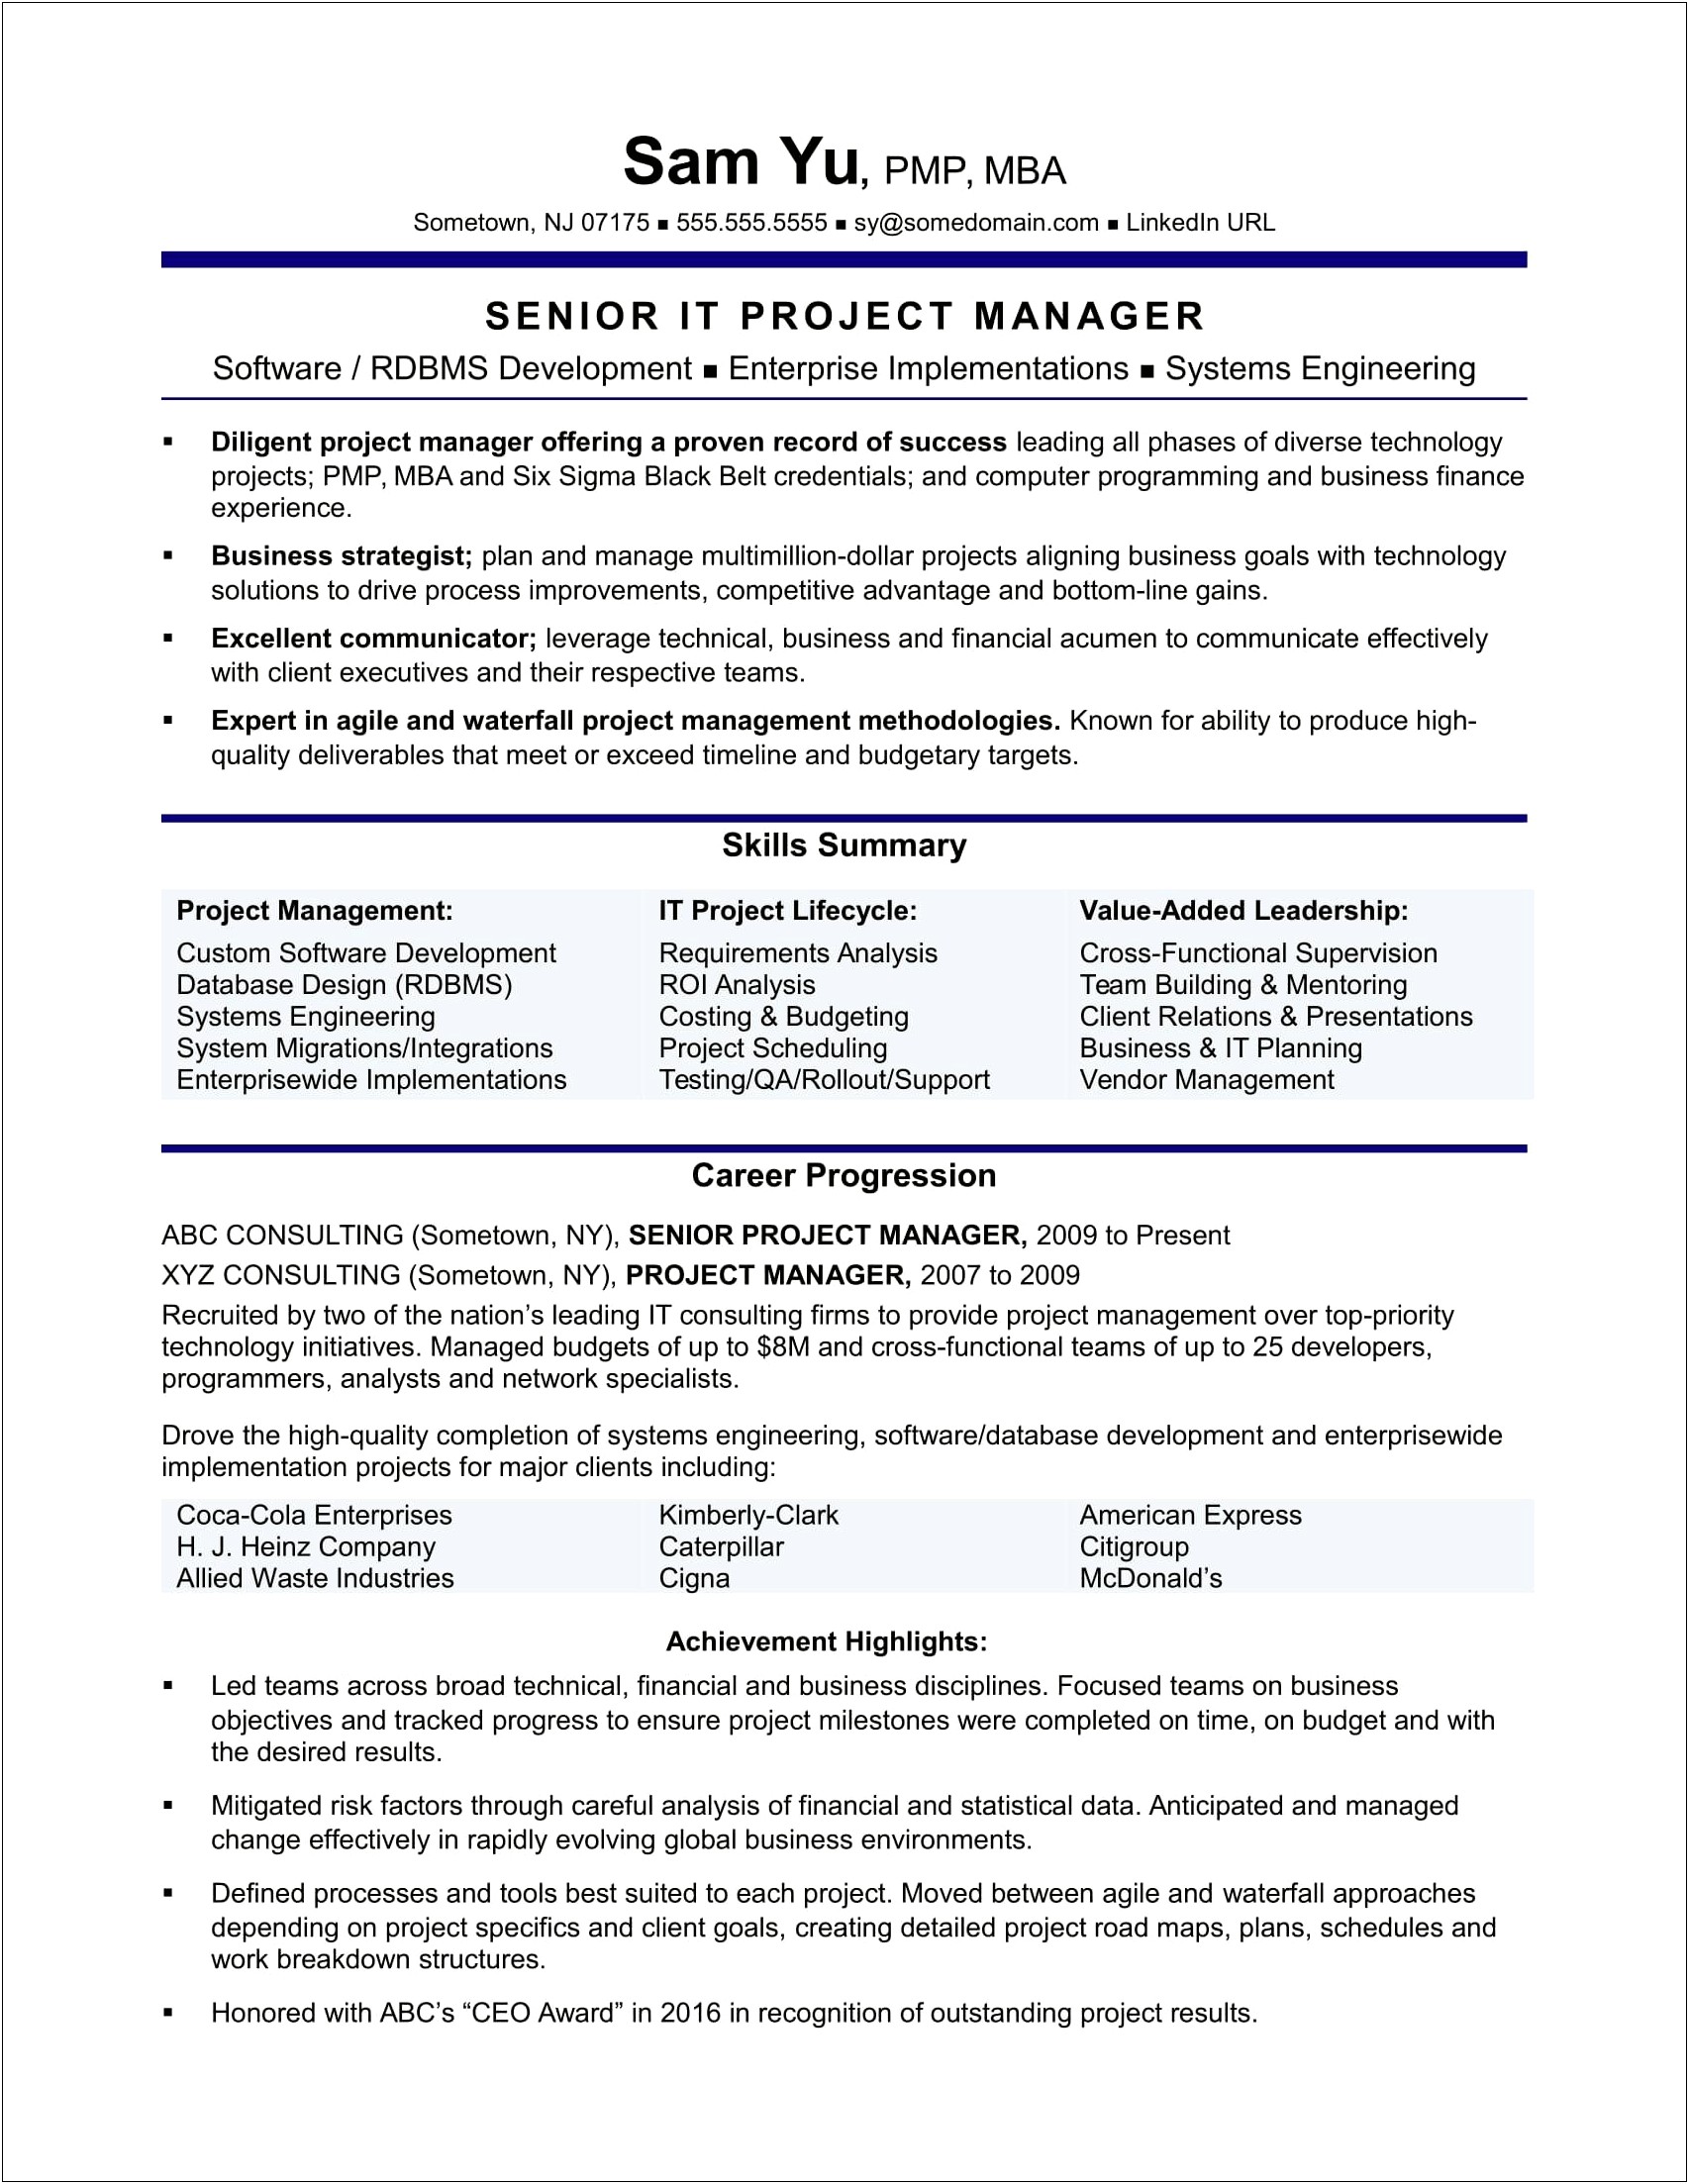 Program Manager Roles And Responsibilities Resume